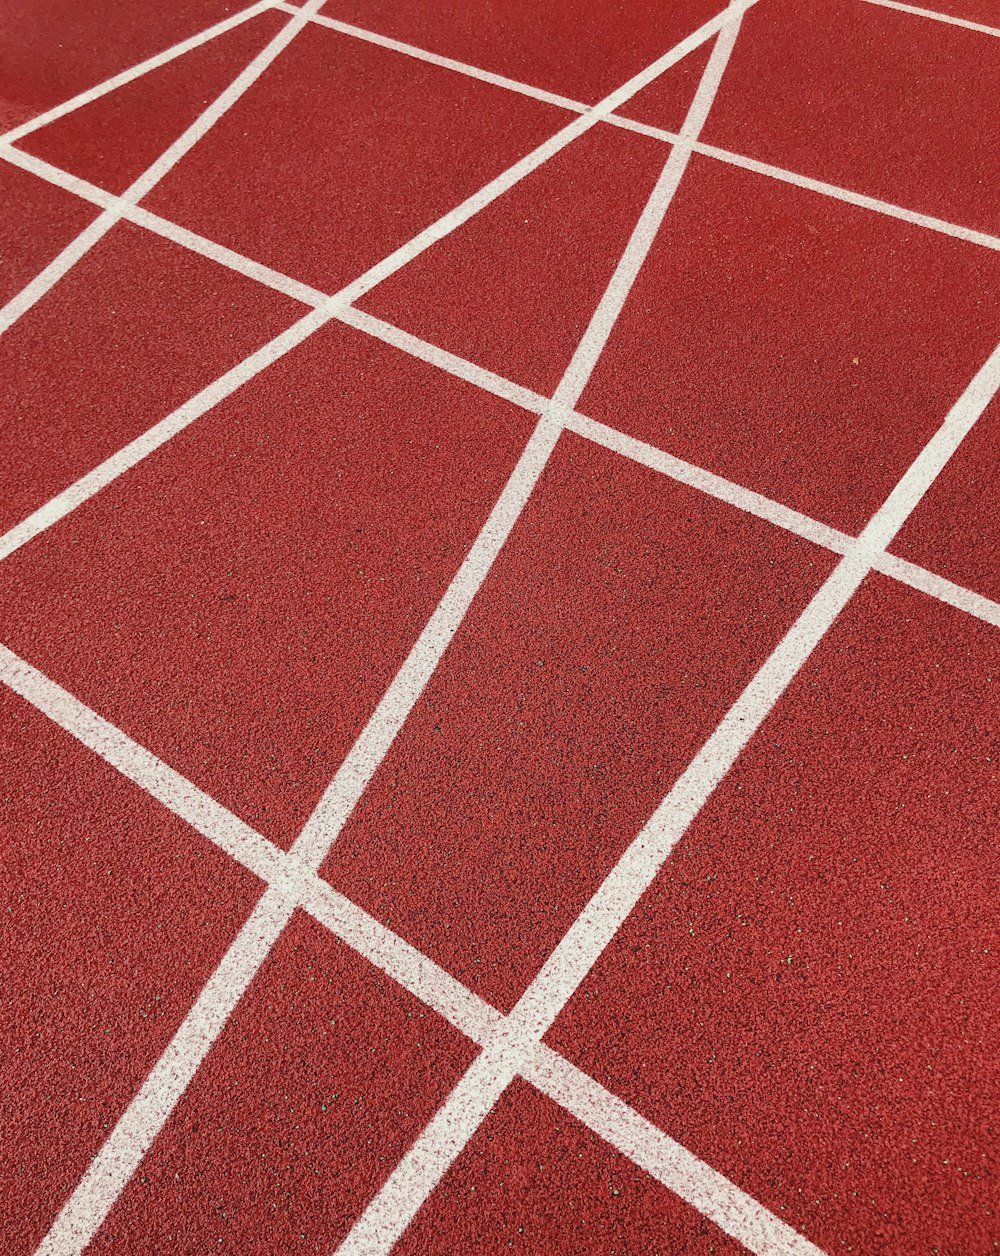 a close up of a red tennis court with white lines